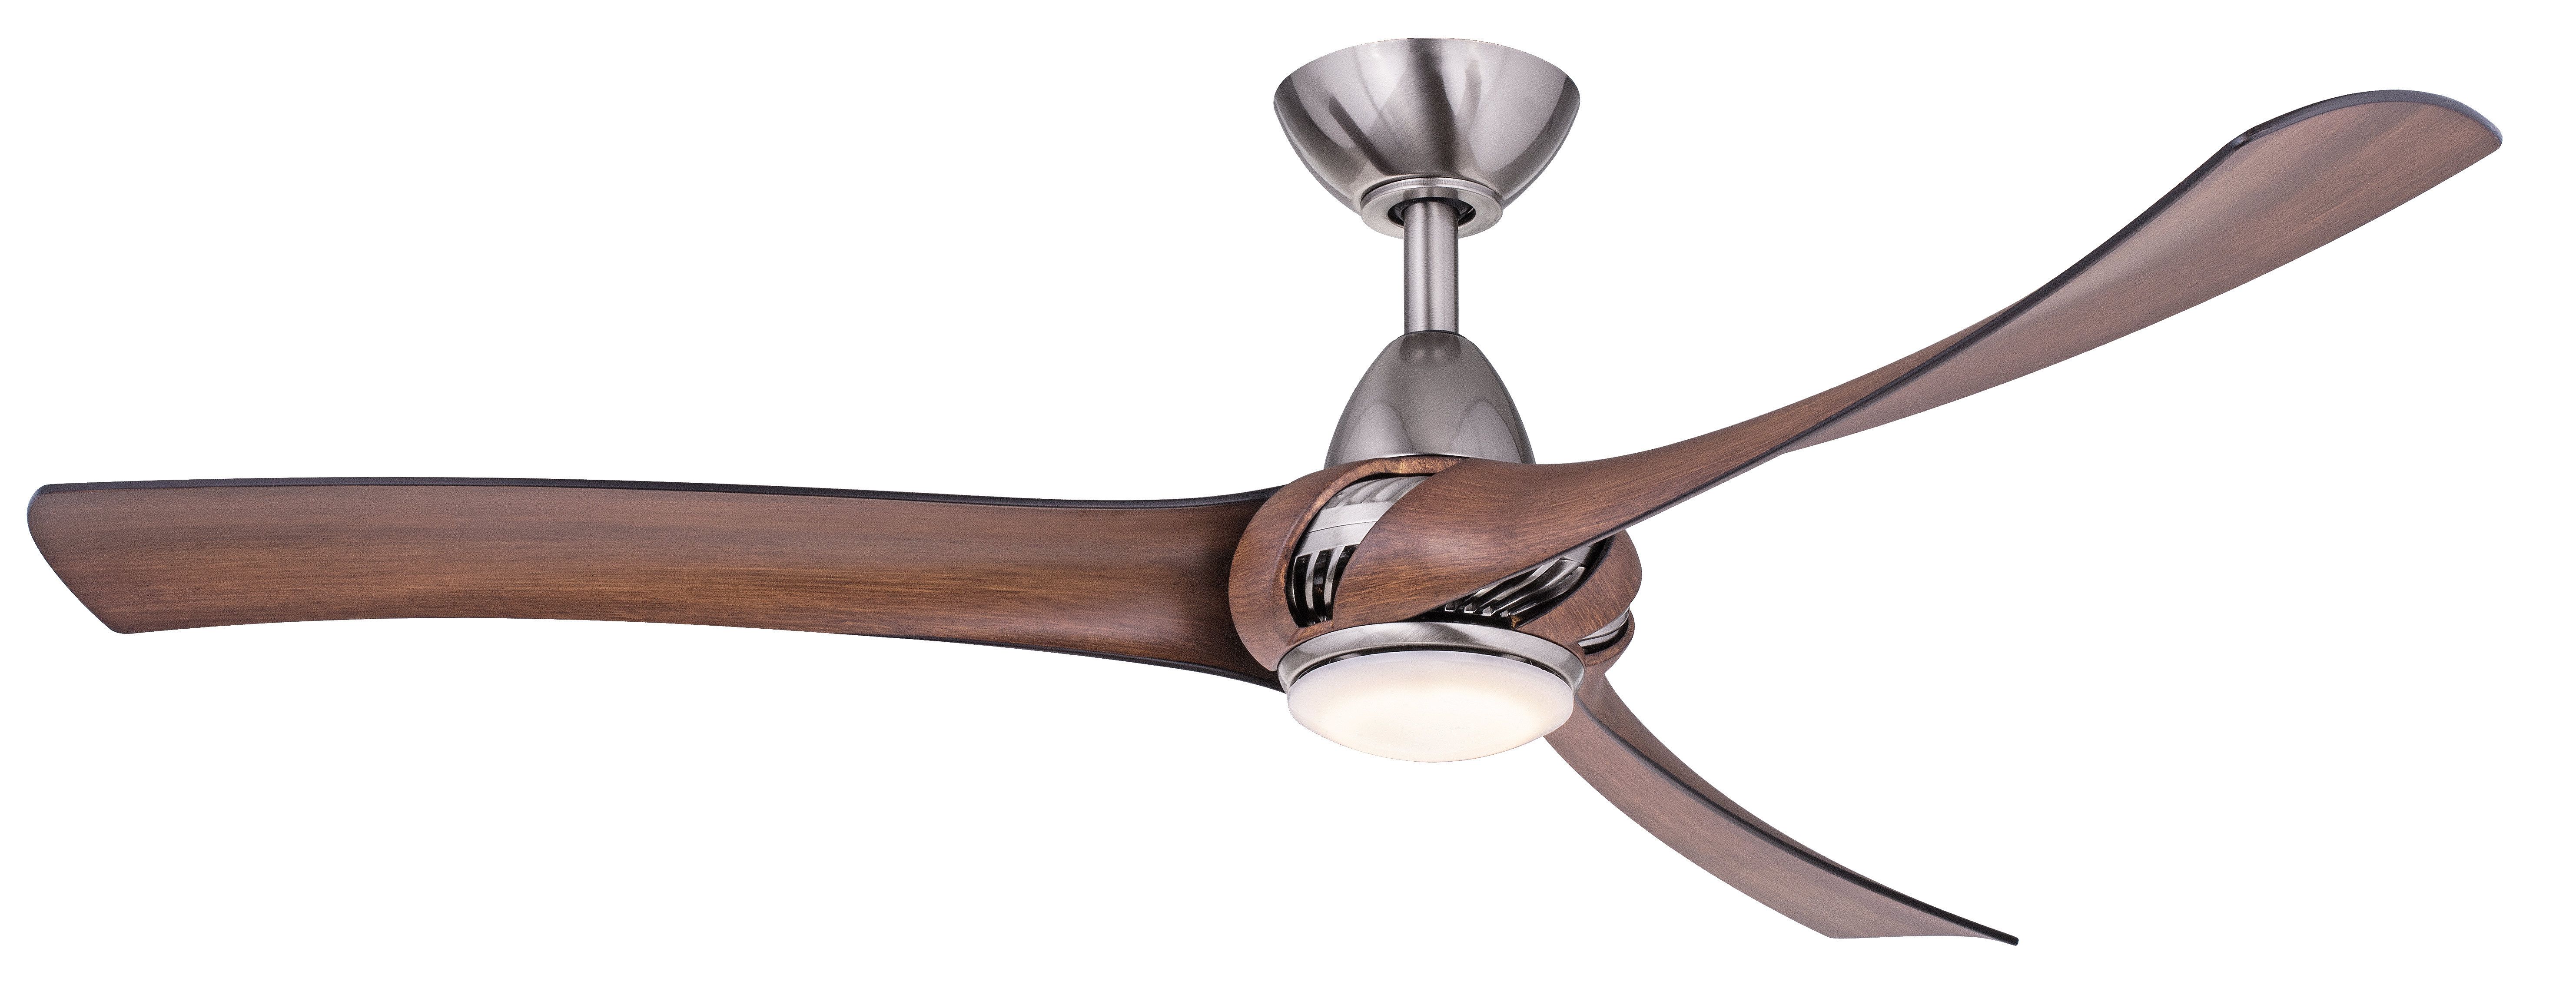 Most Recent 52'' Cairo 3 Blade Led Ceiling Fan With Remote, Light Kit Included Within Wave 3 Blade Led Ceiling Fans With Remote (View 2 of 20)